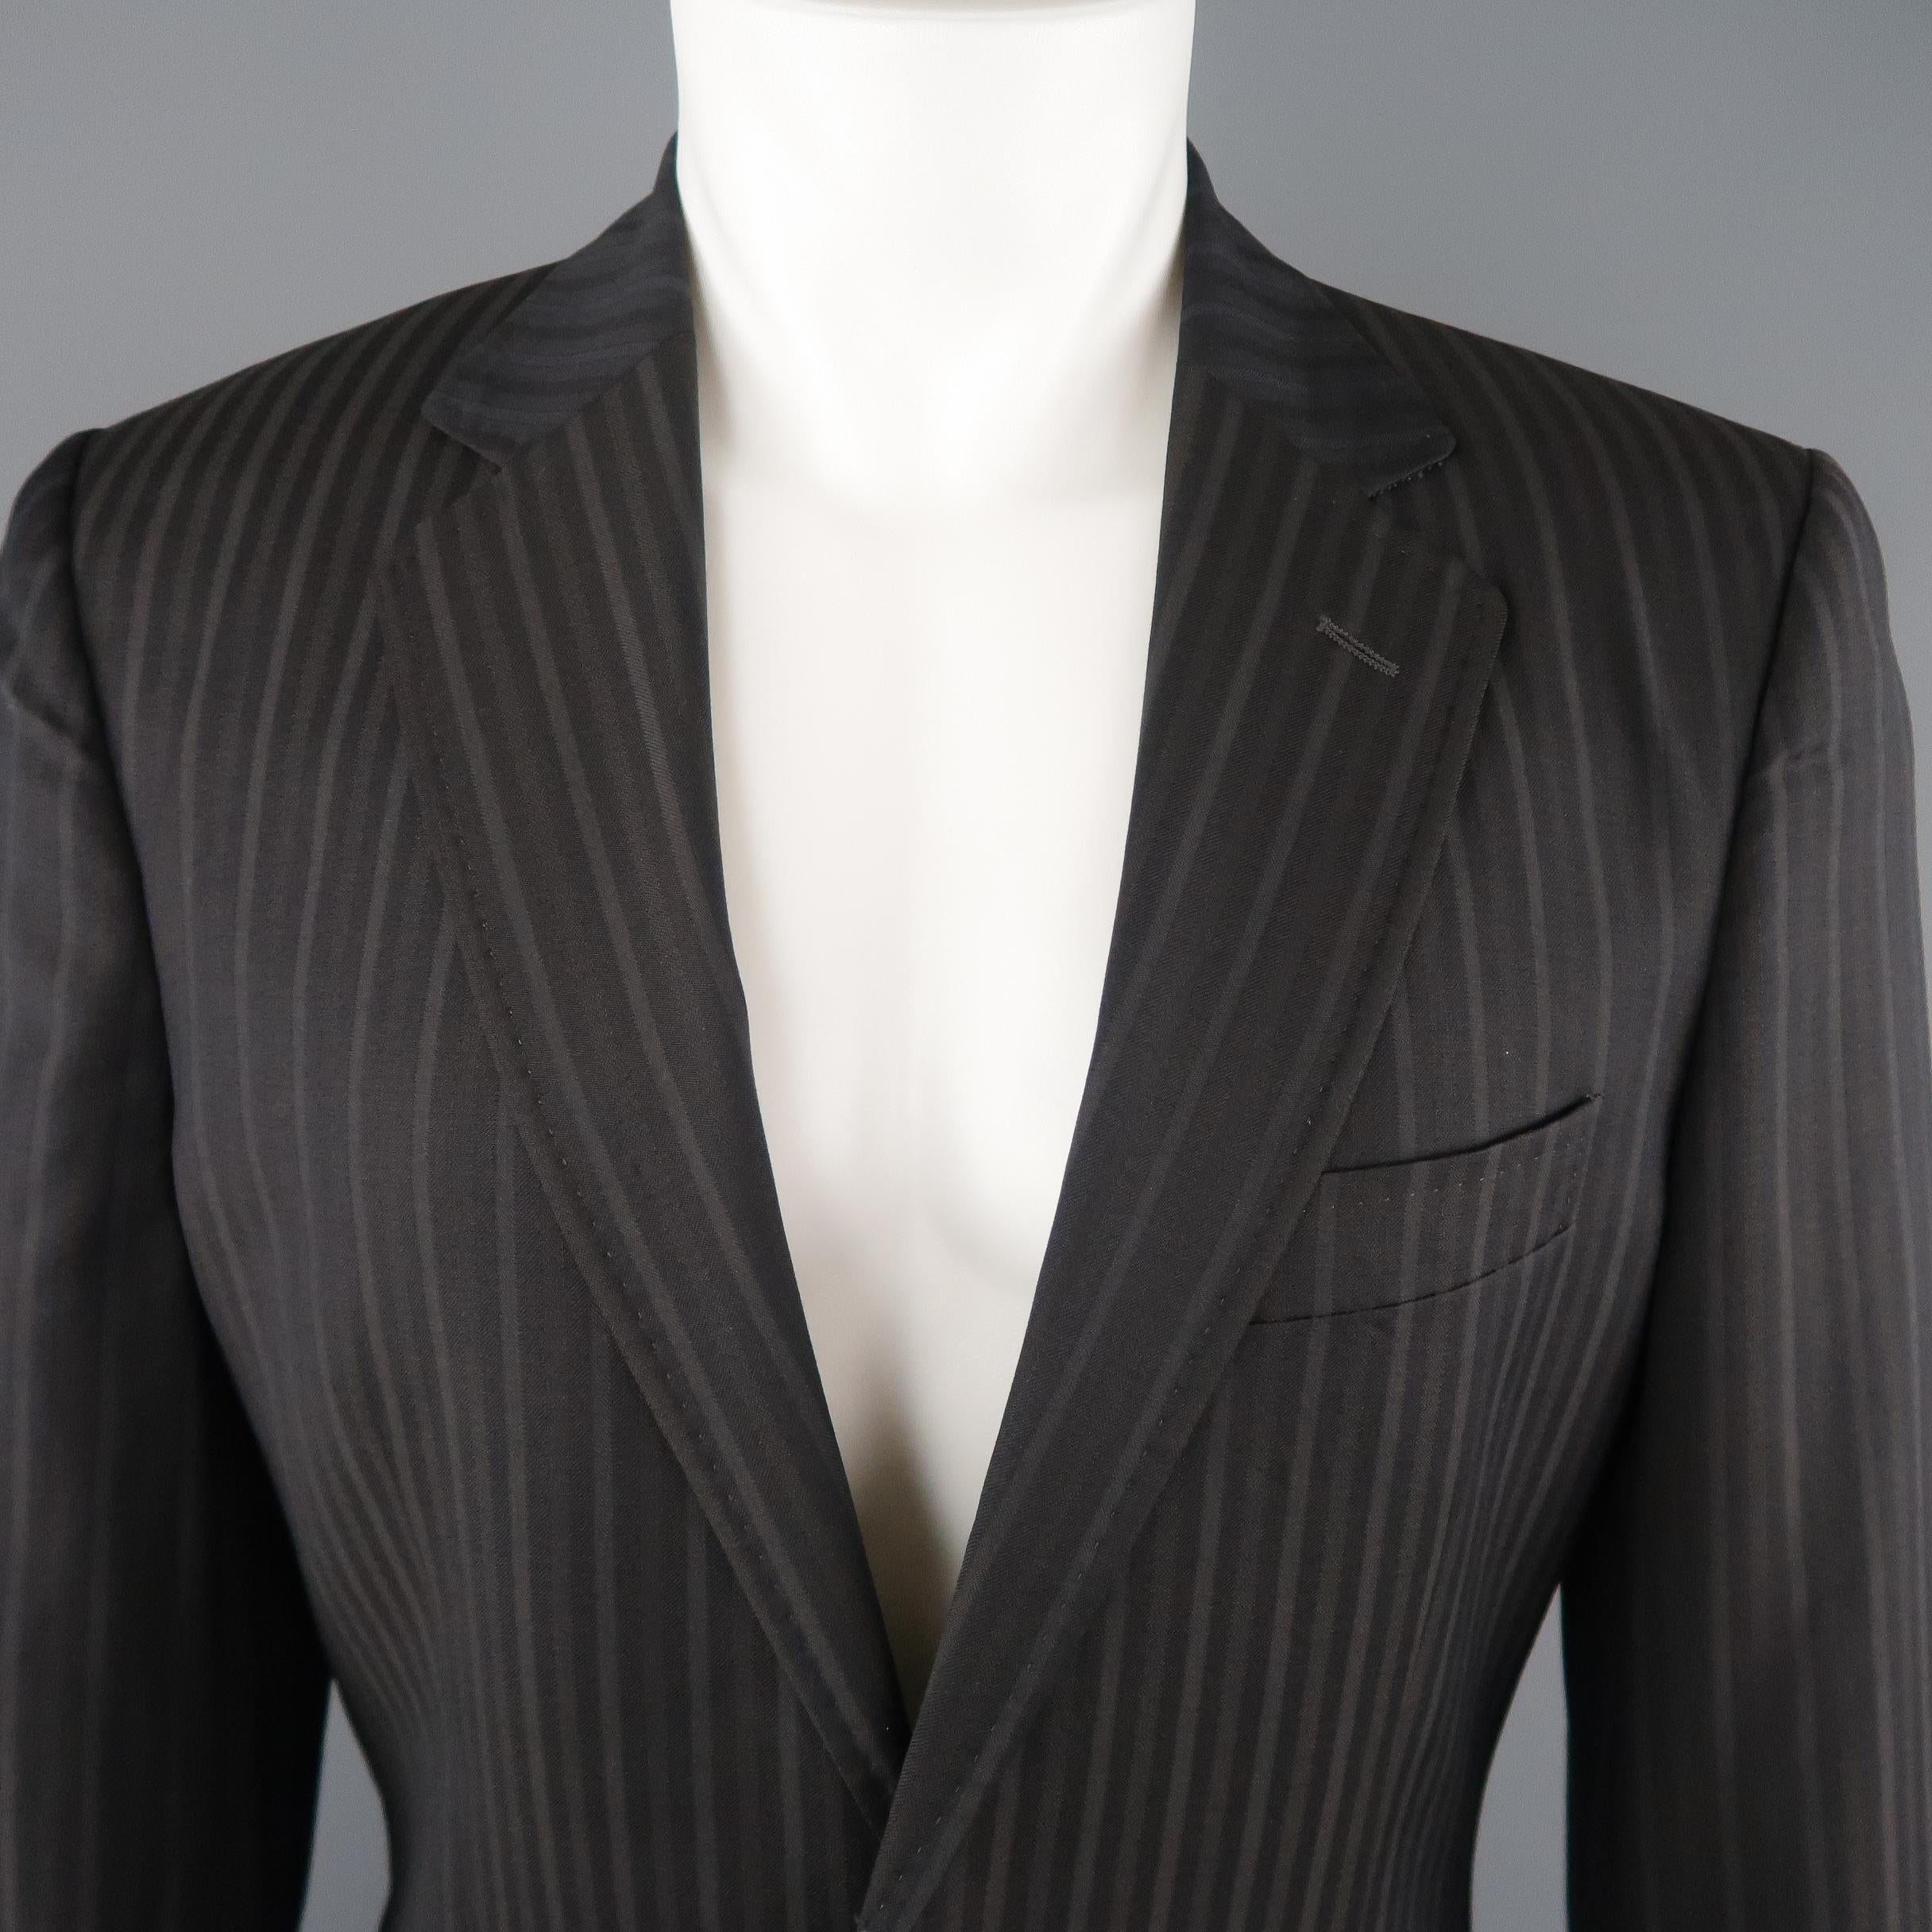 DOLCE & GABBANA sport coat comes in navy wool with brown and taupe stripe pattern, notch lapel with top stitching, single breasted two button closure, and single vented back. Made in Italy.
 
Excellent Pre-Owned Condition.
Marked: IT 48
